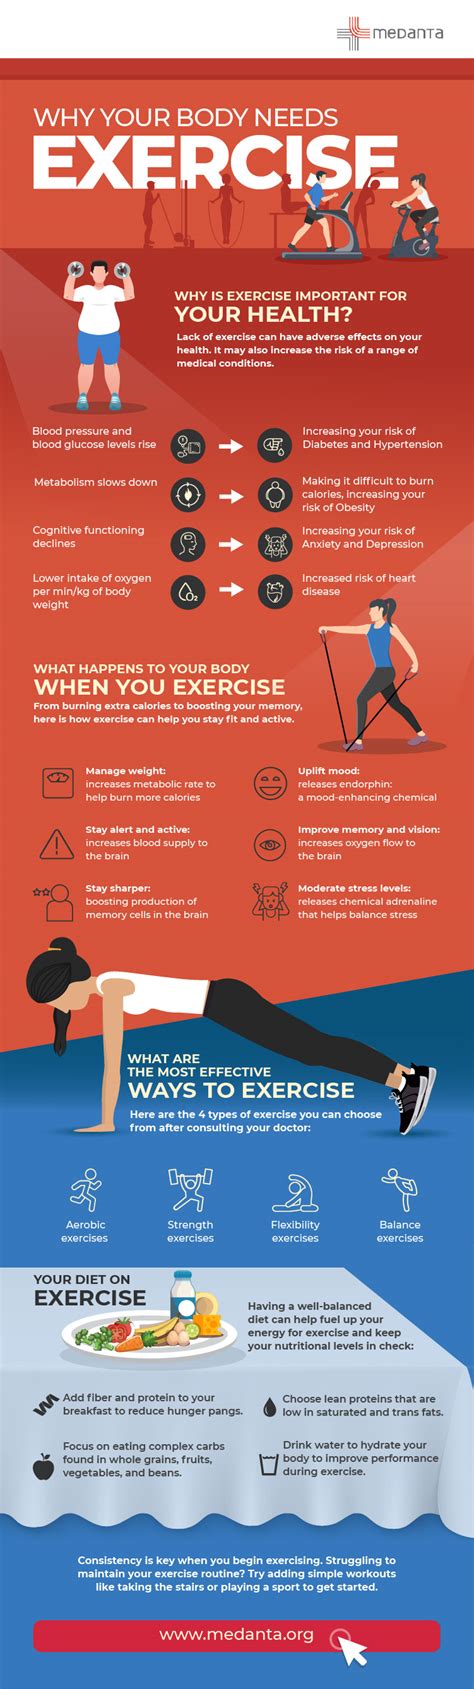 Medanta Why Is Exercise Important For Your Body